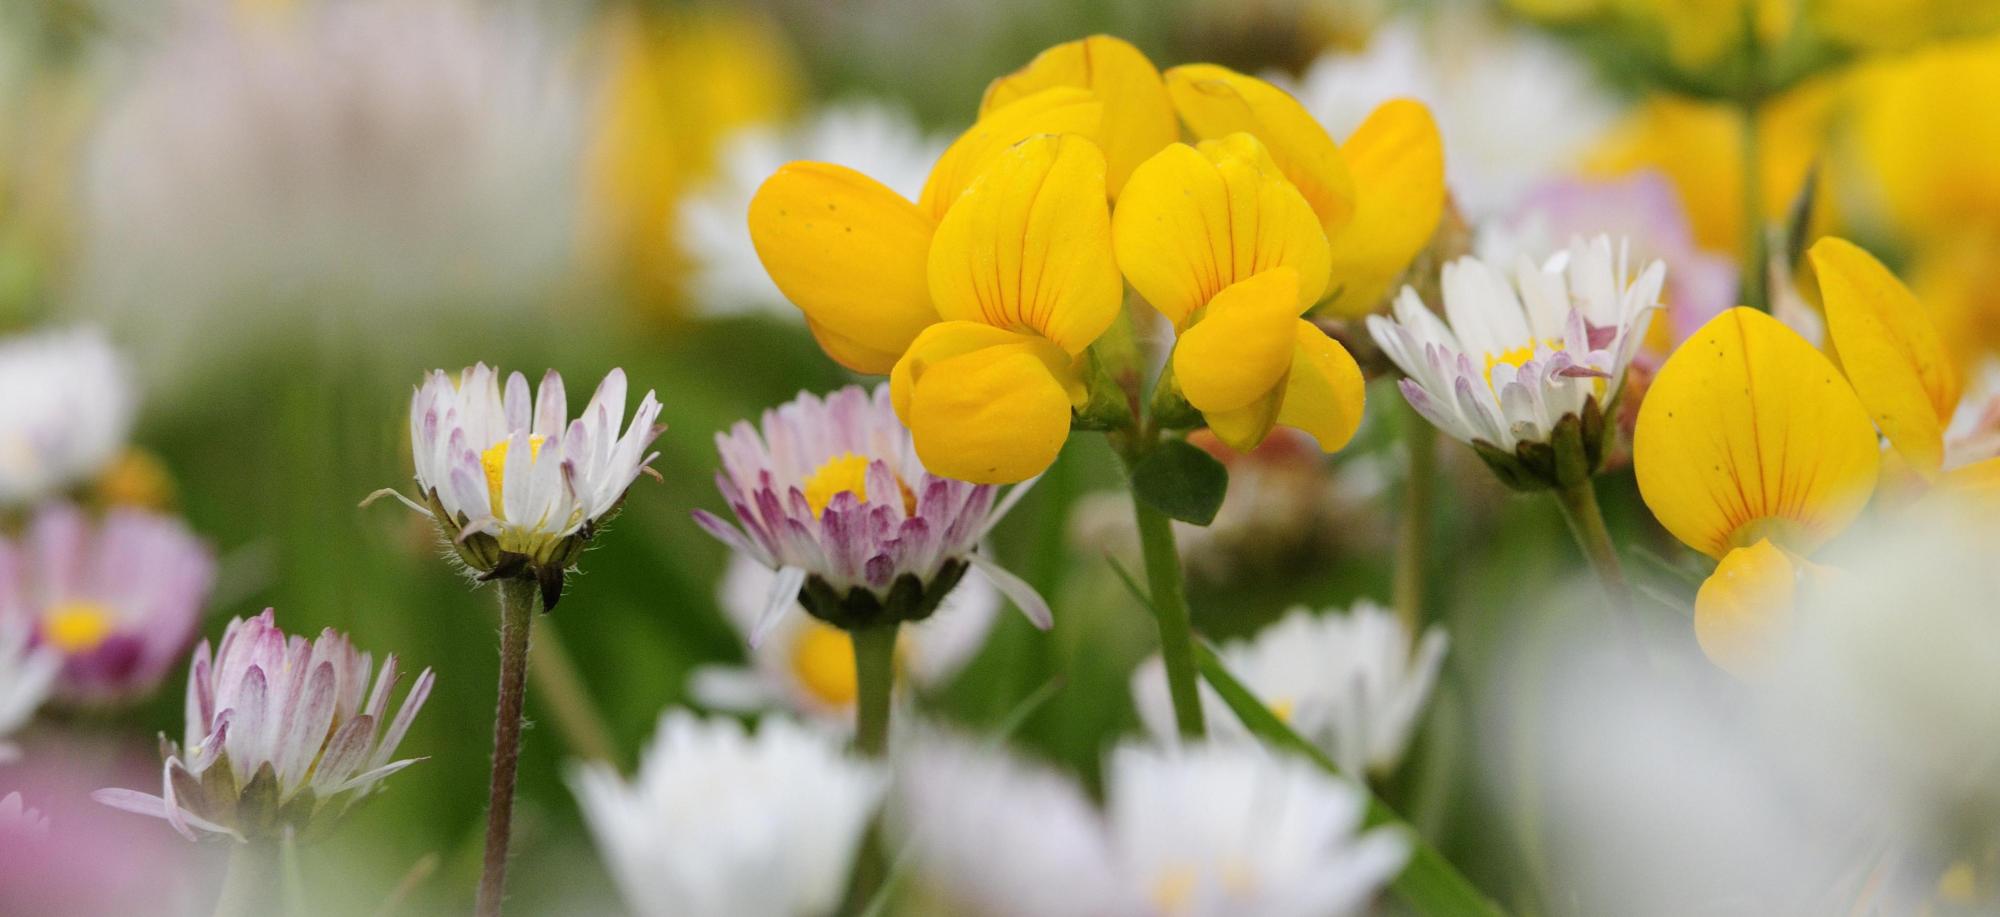 Close up of plants - Birds foot trefoil and daisies growing on the Benbecula machair, Western Isles